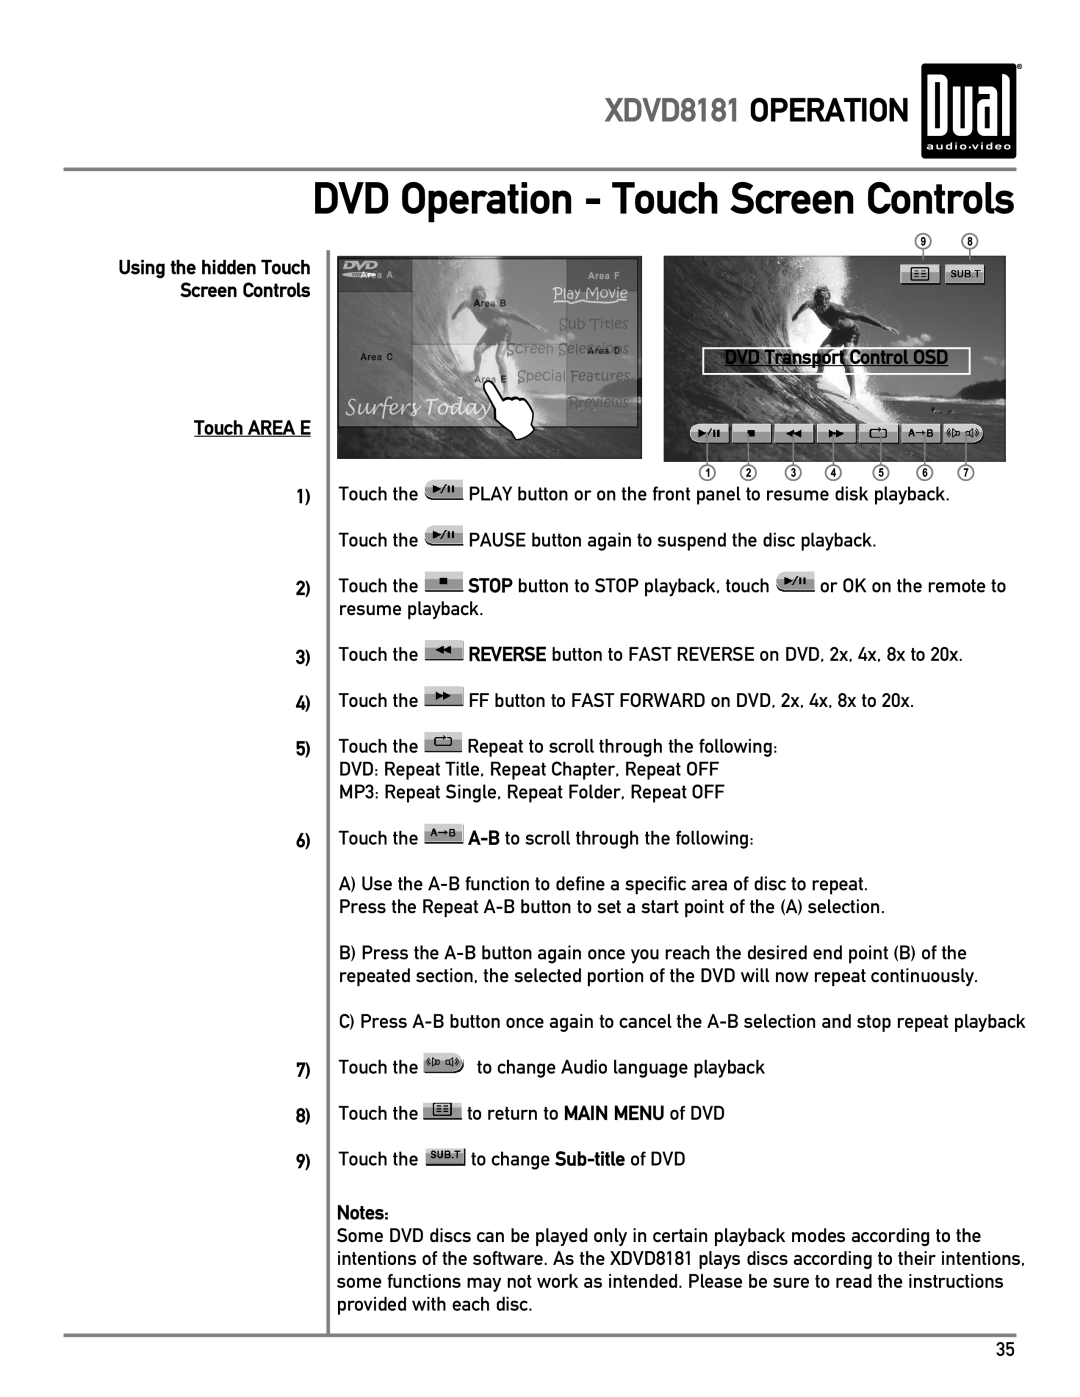 Dual DVD Operation - Touch Screen Controls, XDVD8181 OPERATION, Touch AREA E 1 2 3 4 5, DVD Transport Control OSD 